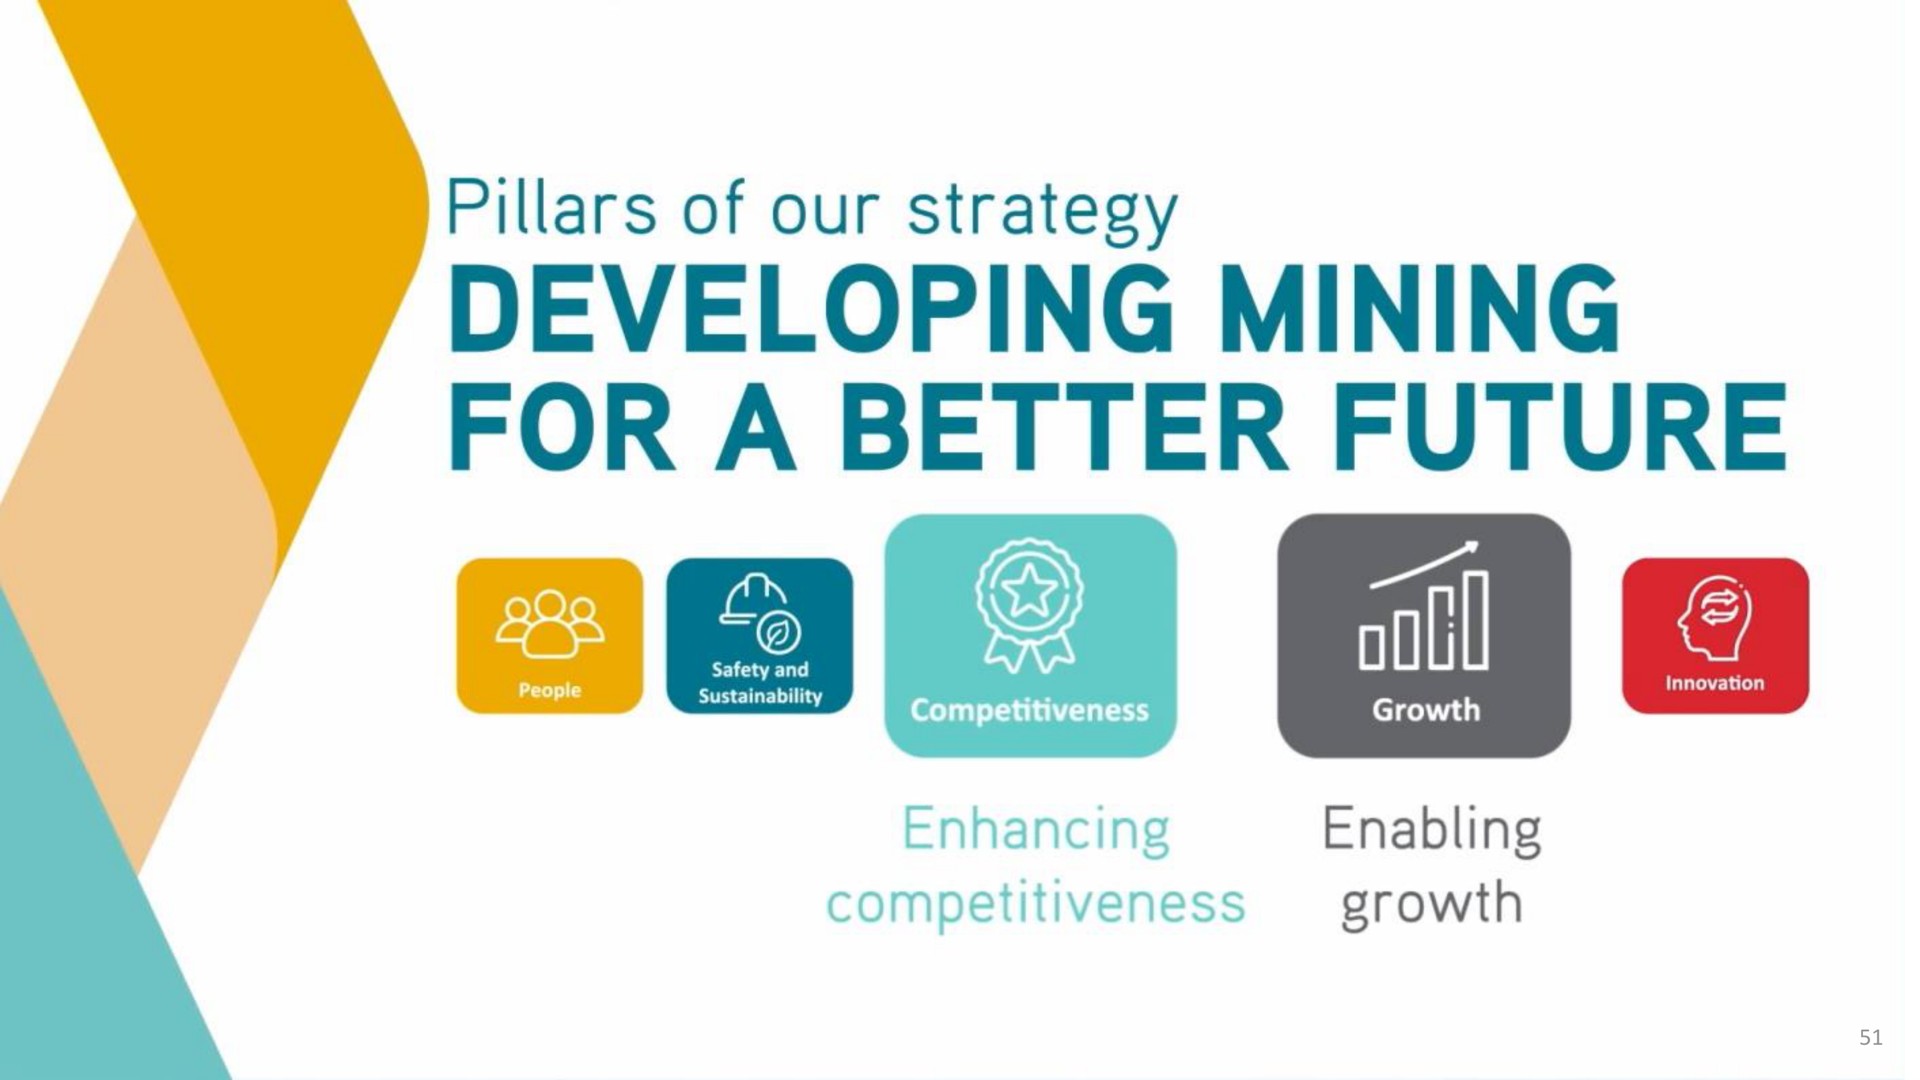 pillars of our strategy developing mining for a better future enhancing competitiveness enabling growth | Antofagasta